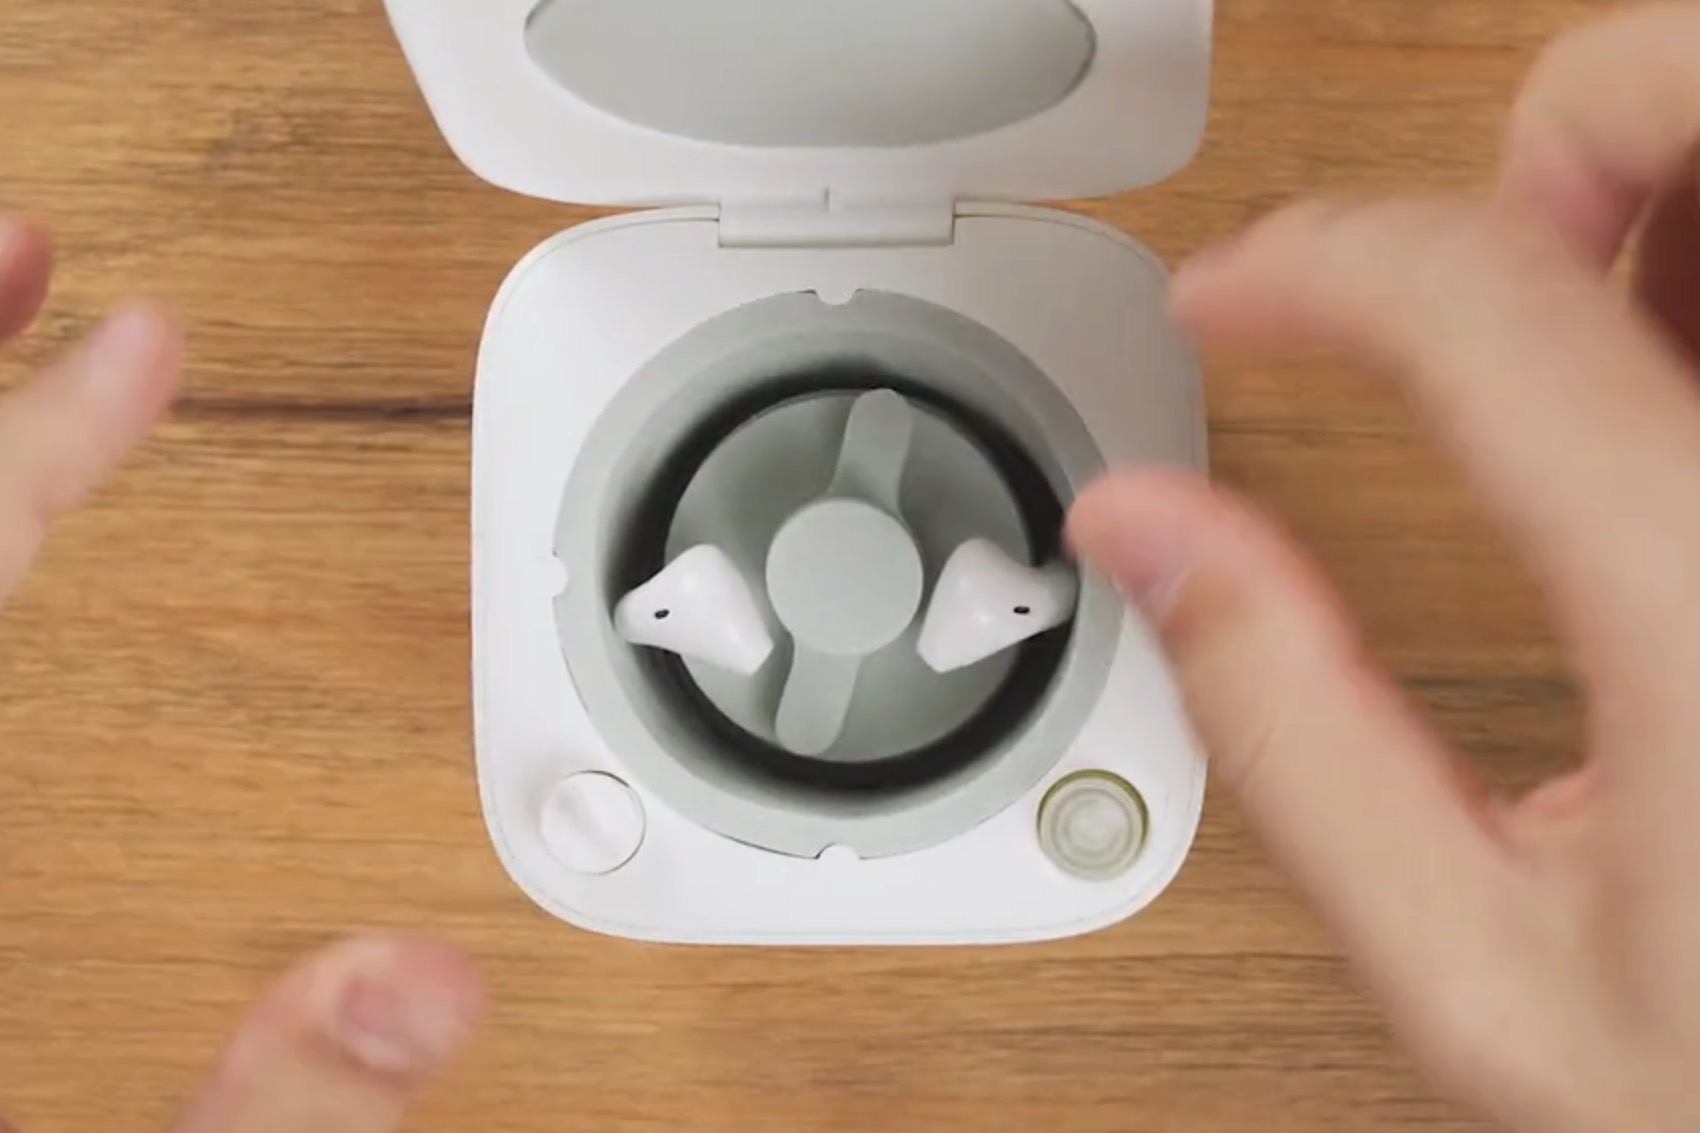 Australsk person Citron Regeneration Yes, There Is Now a Washing Machine for Your AirPods | Digital Trends